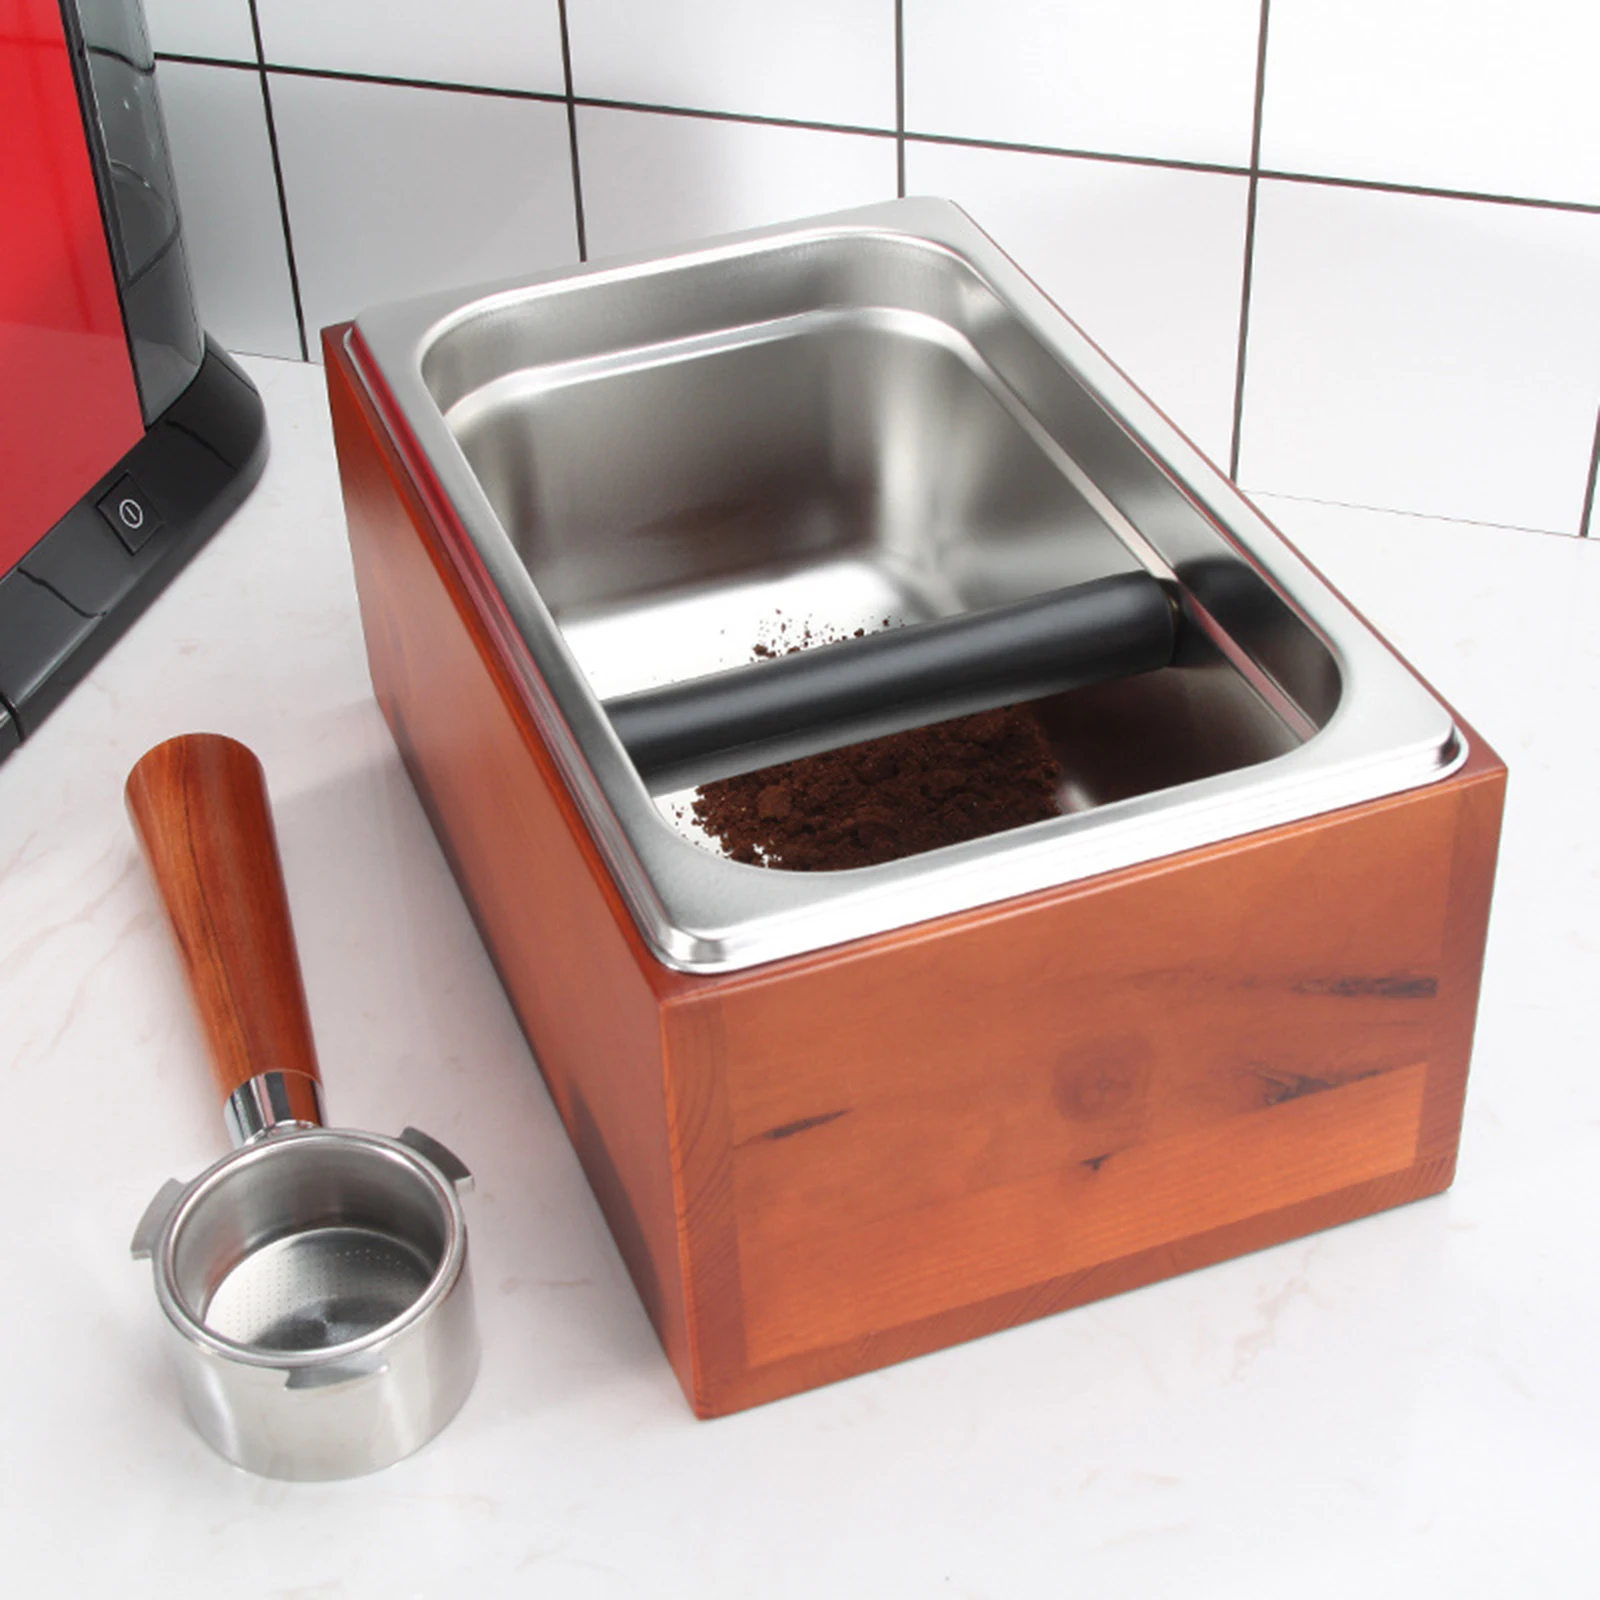 Coffee Knock Box Stainless Steel Non-Slip Solid Wood Base Compact Durable Coffee Ground Knock Container for Home